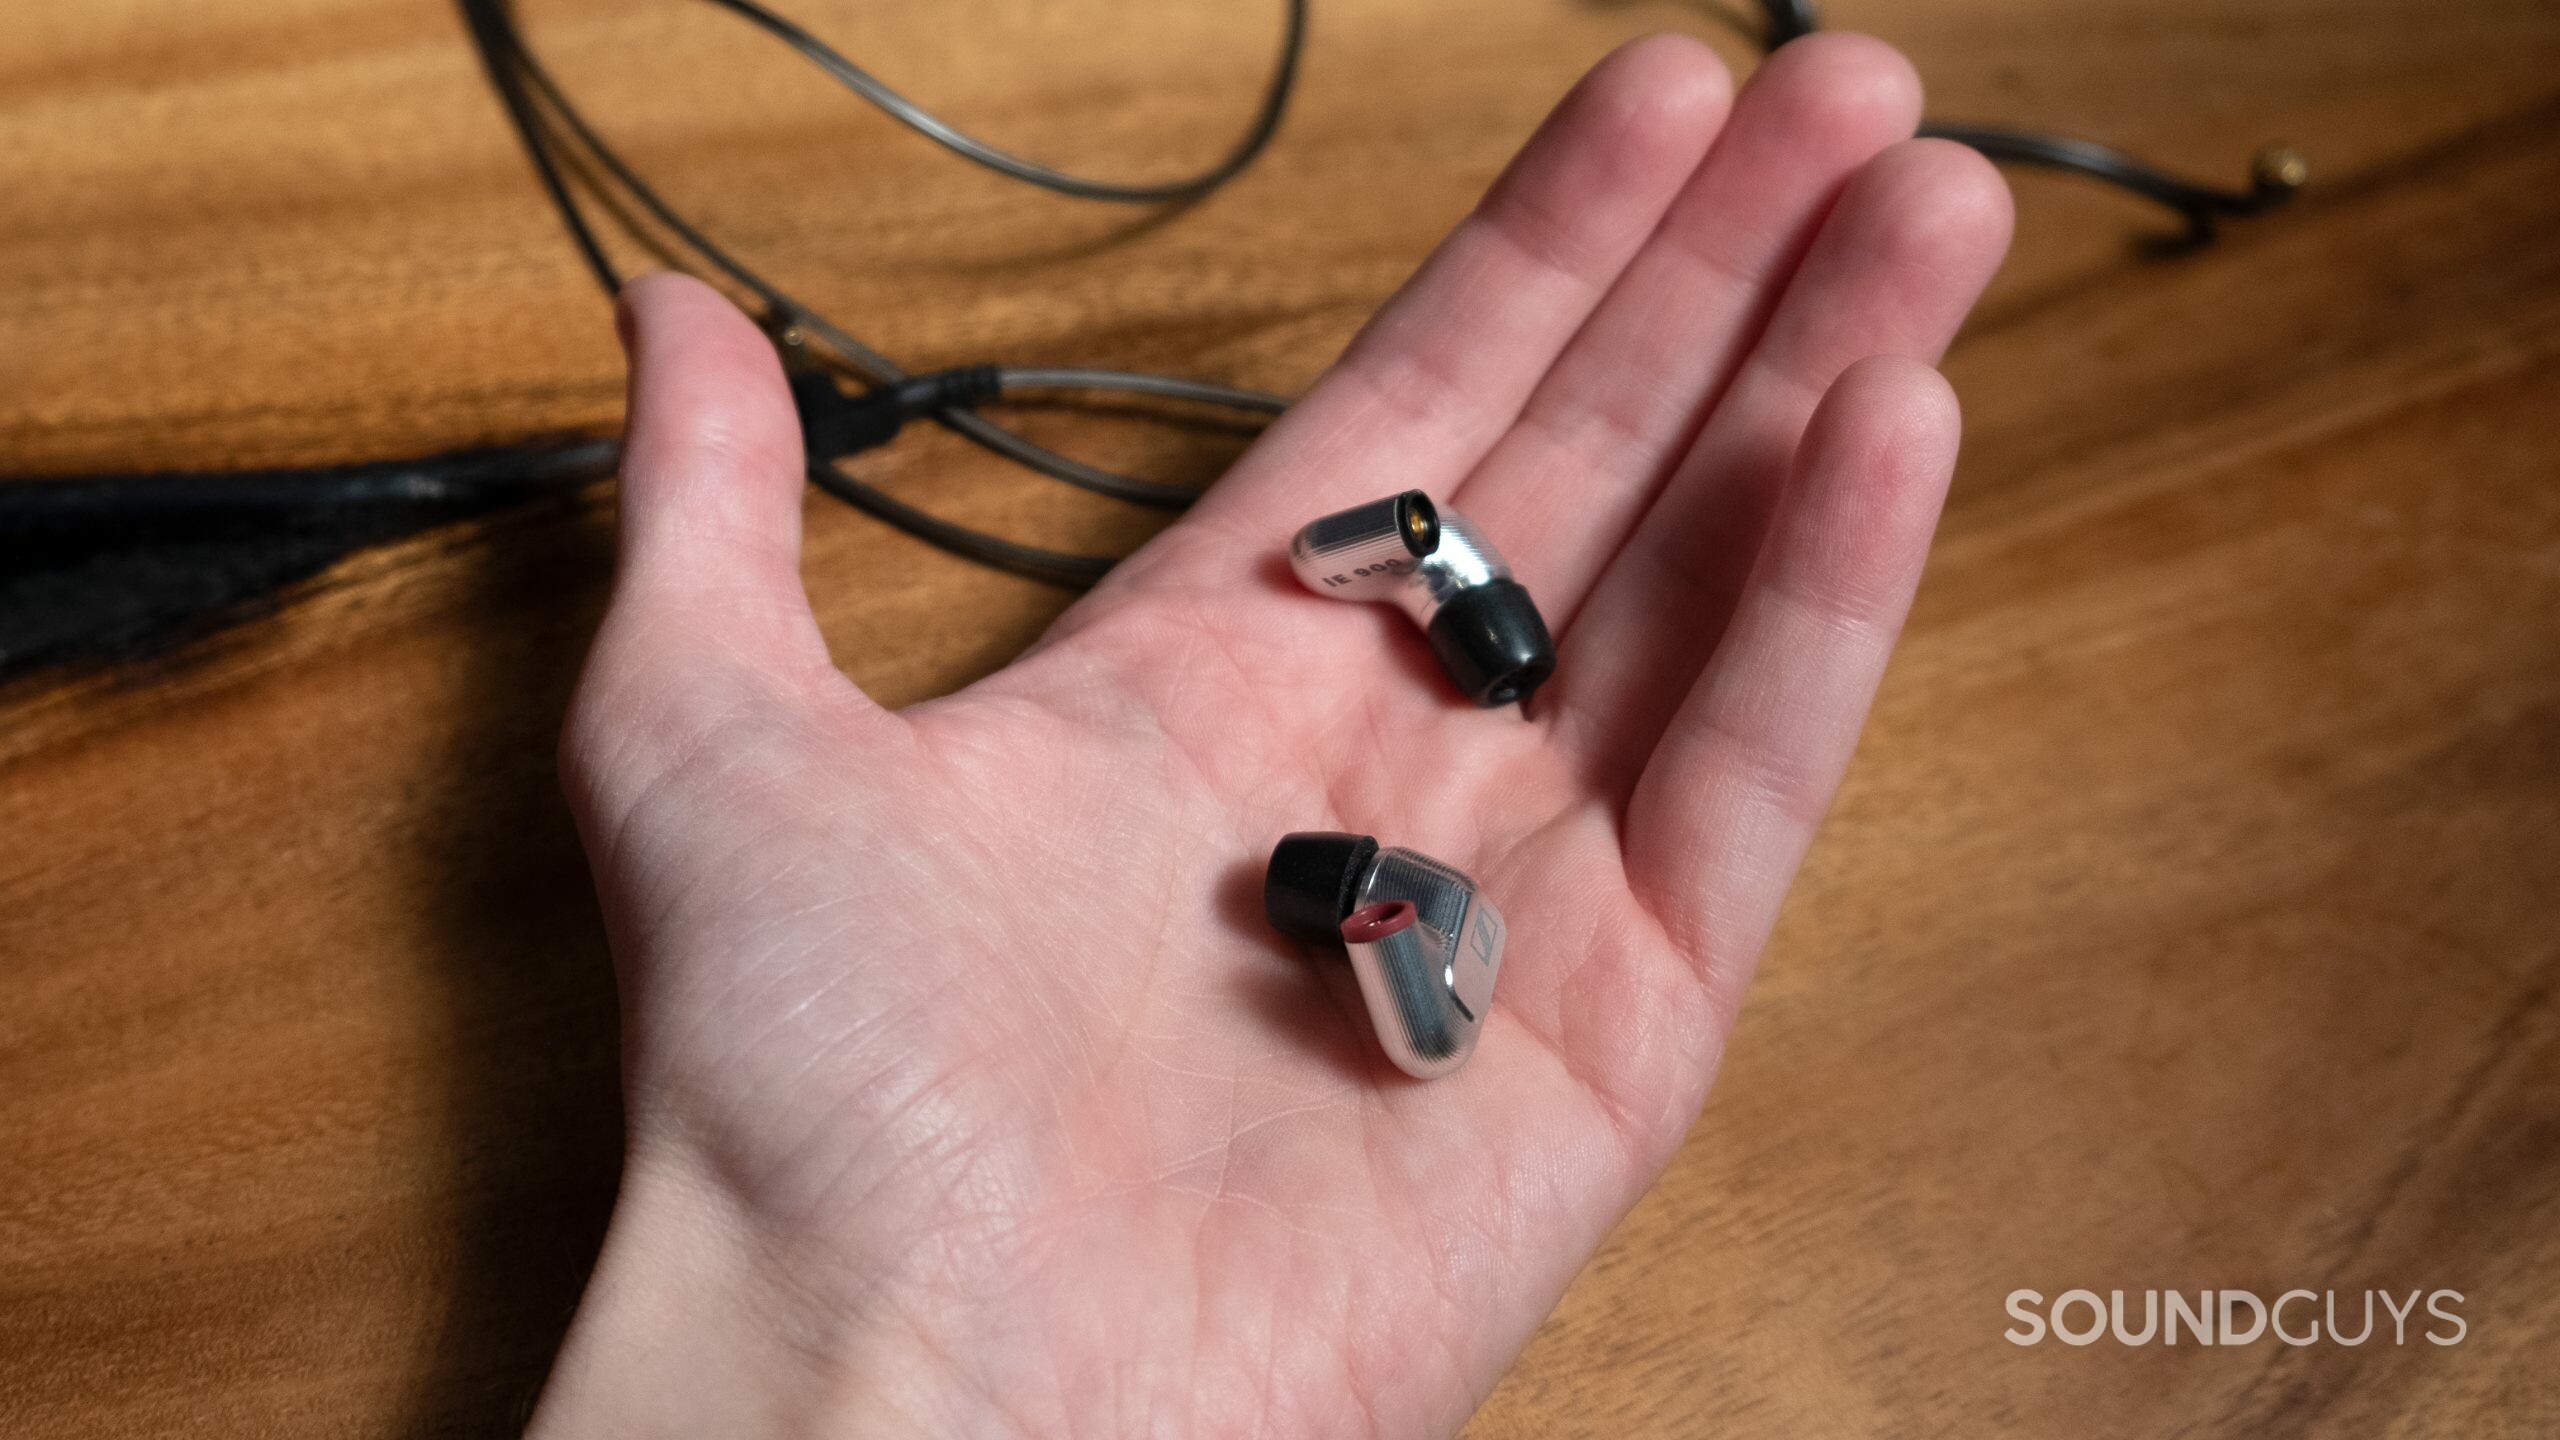 A hand holds the Sennheiser IE 900 earphones without the cable attached.